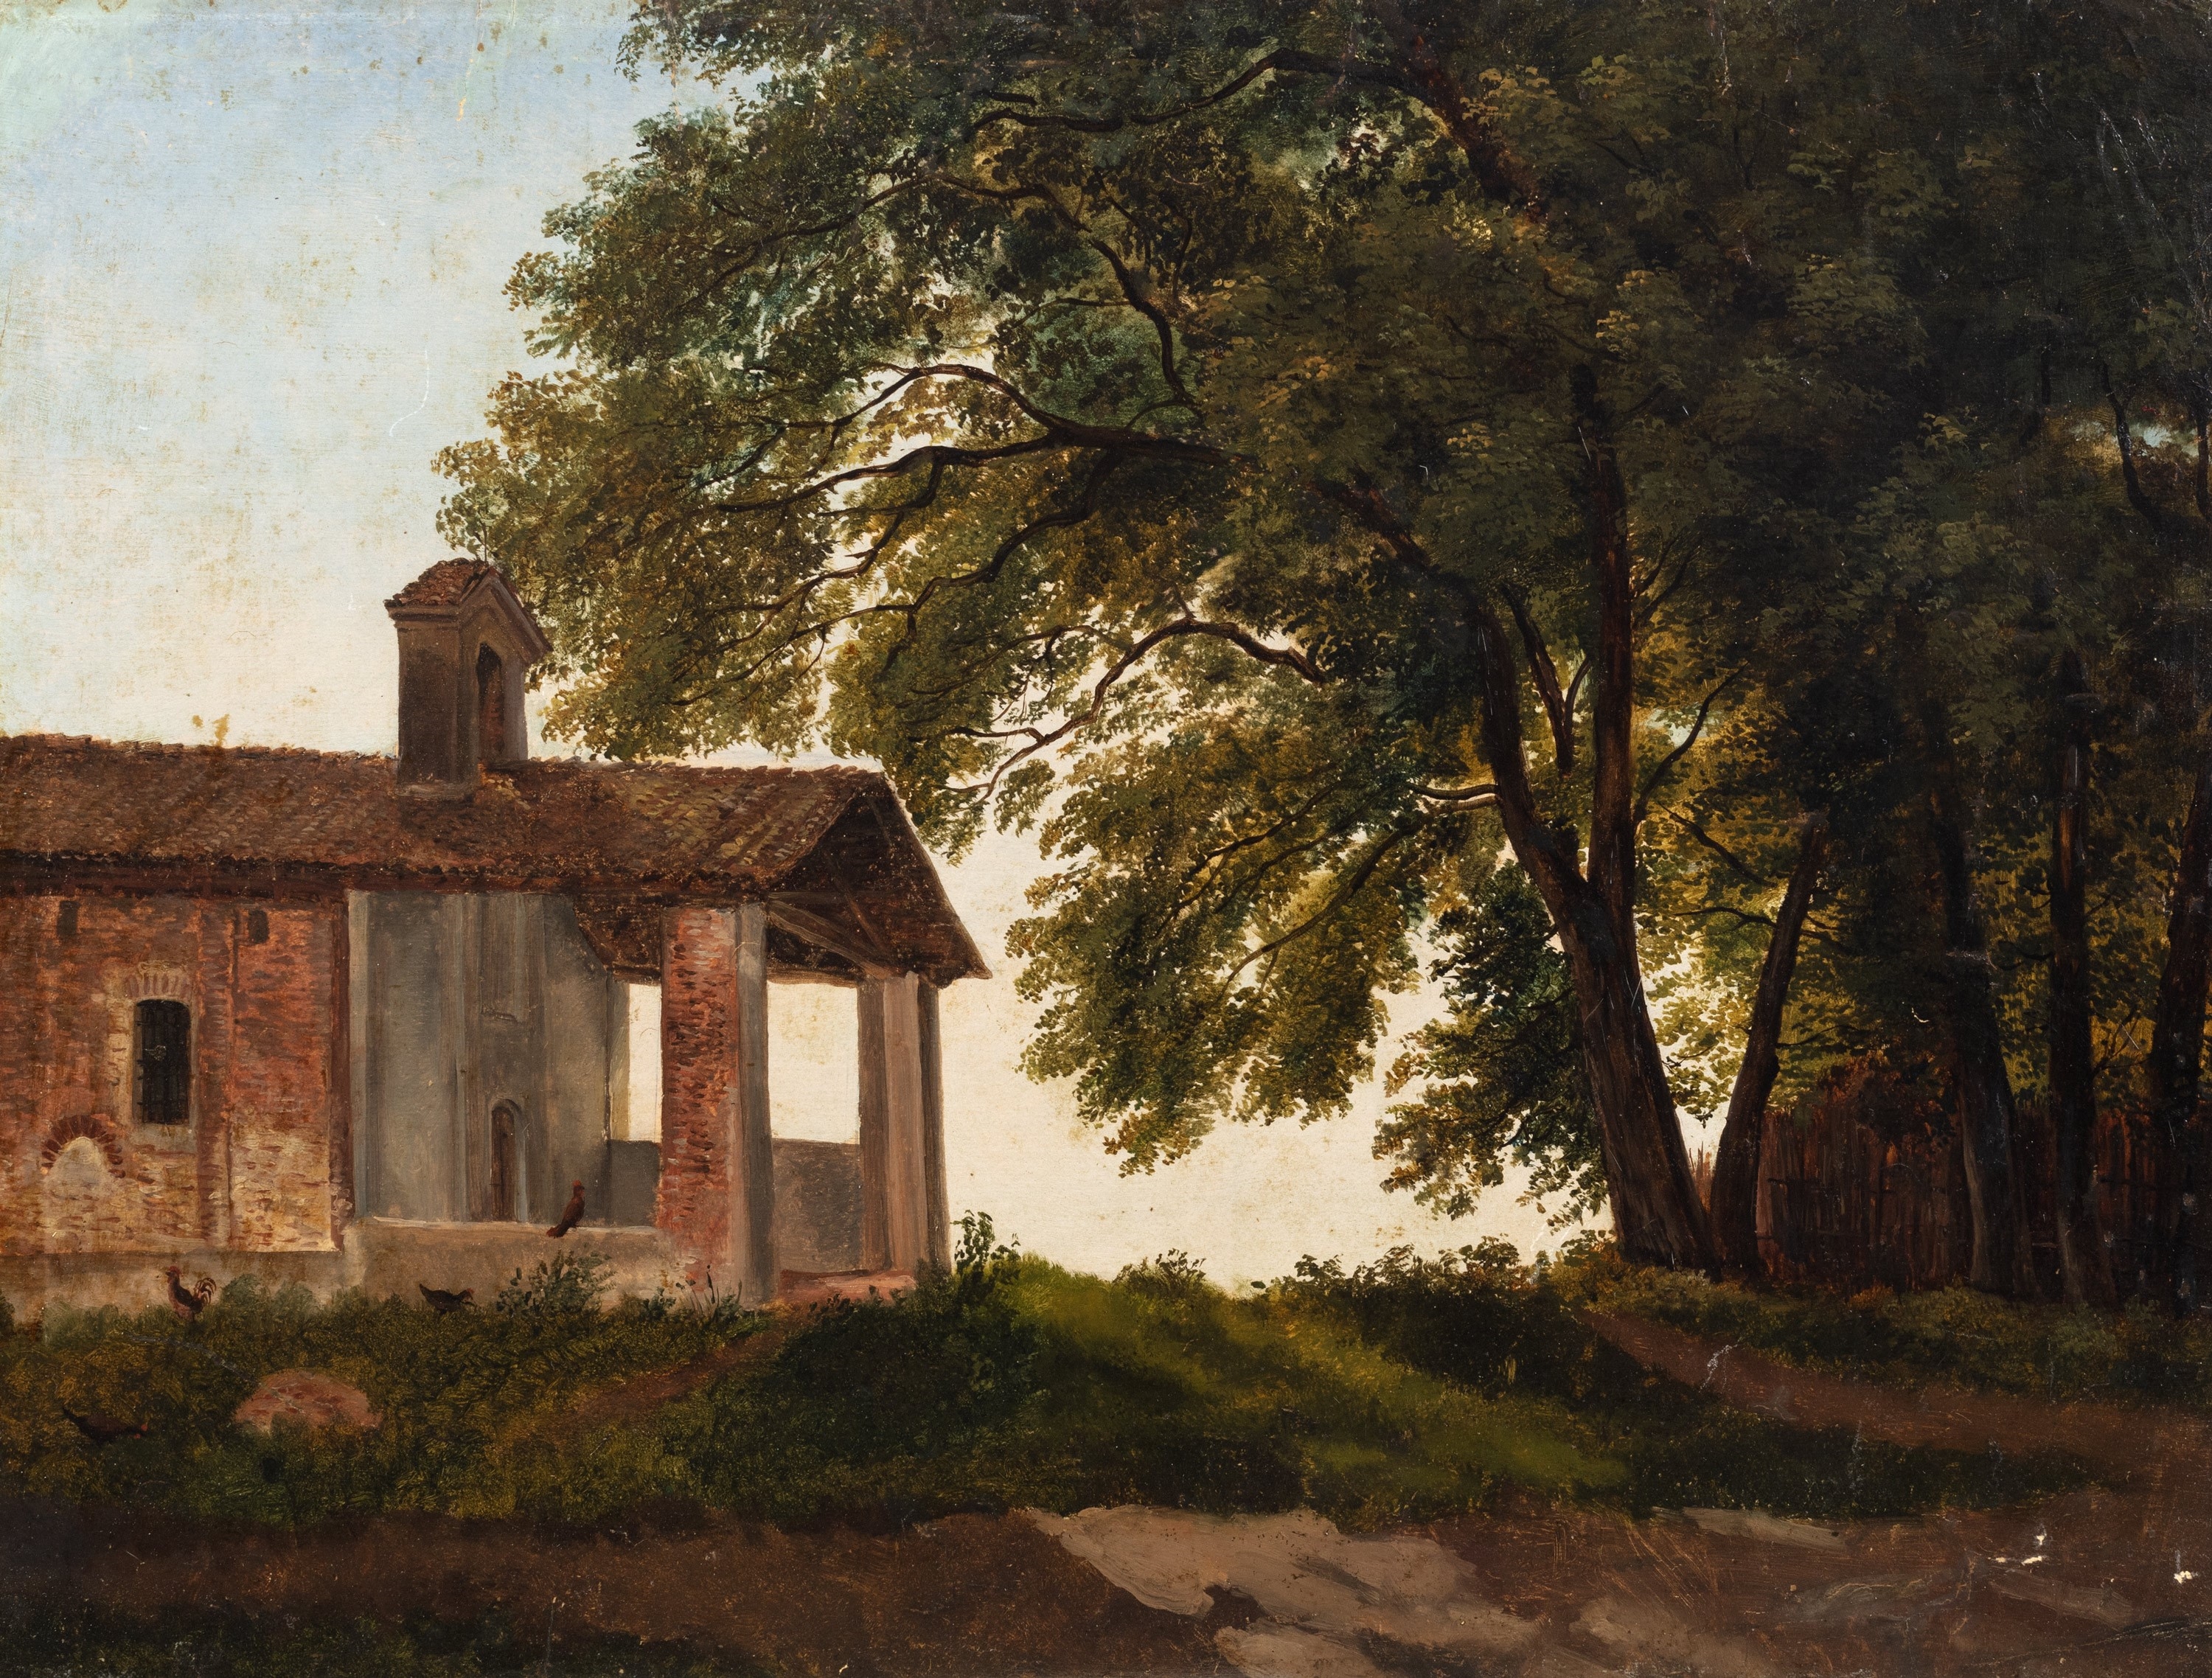 Chapel in the countryside by Giuseppe Haimann